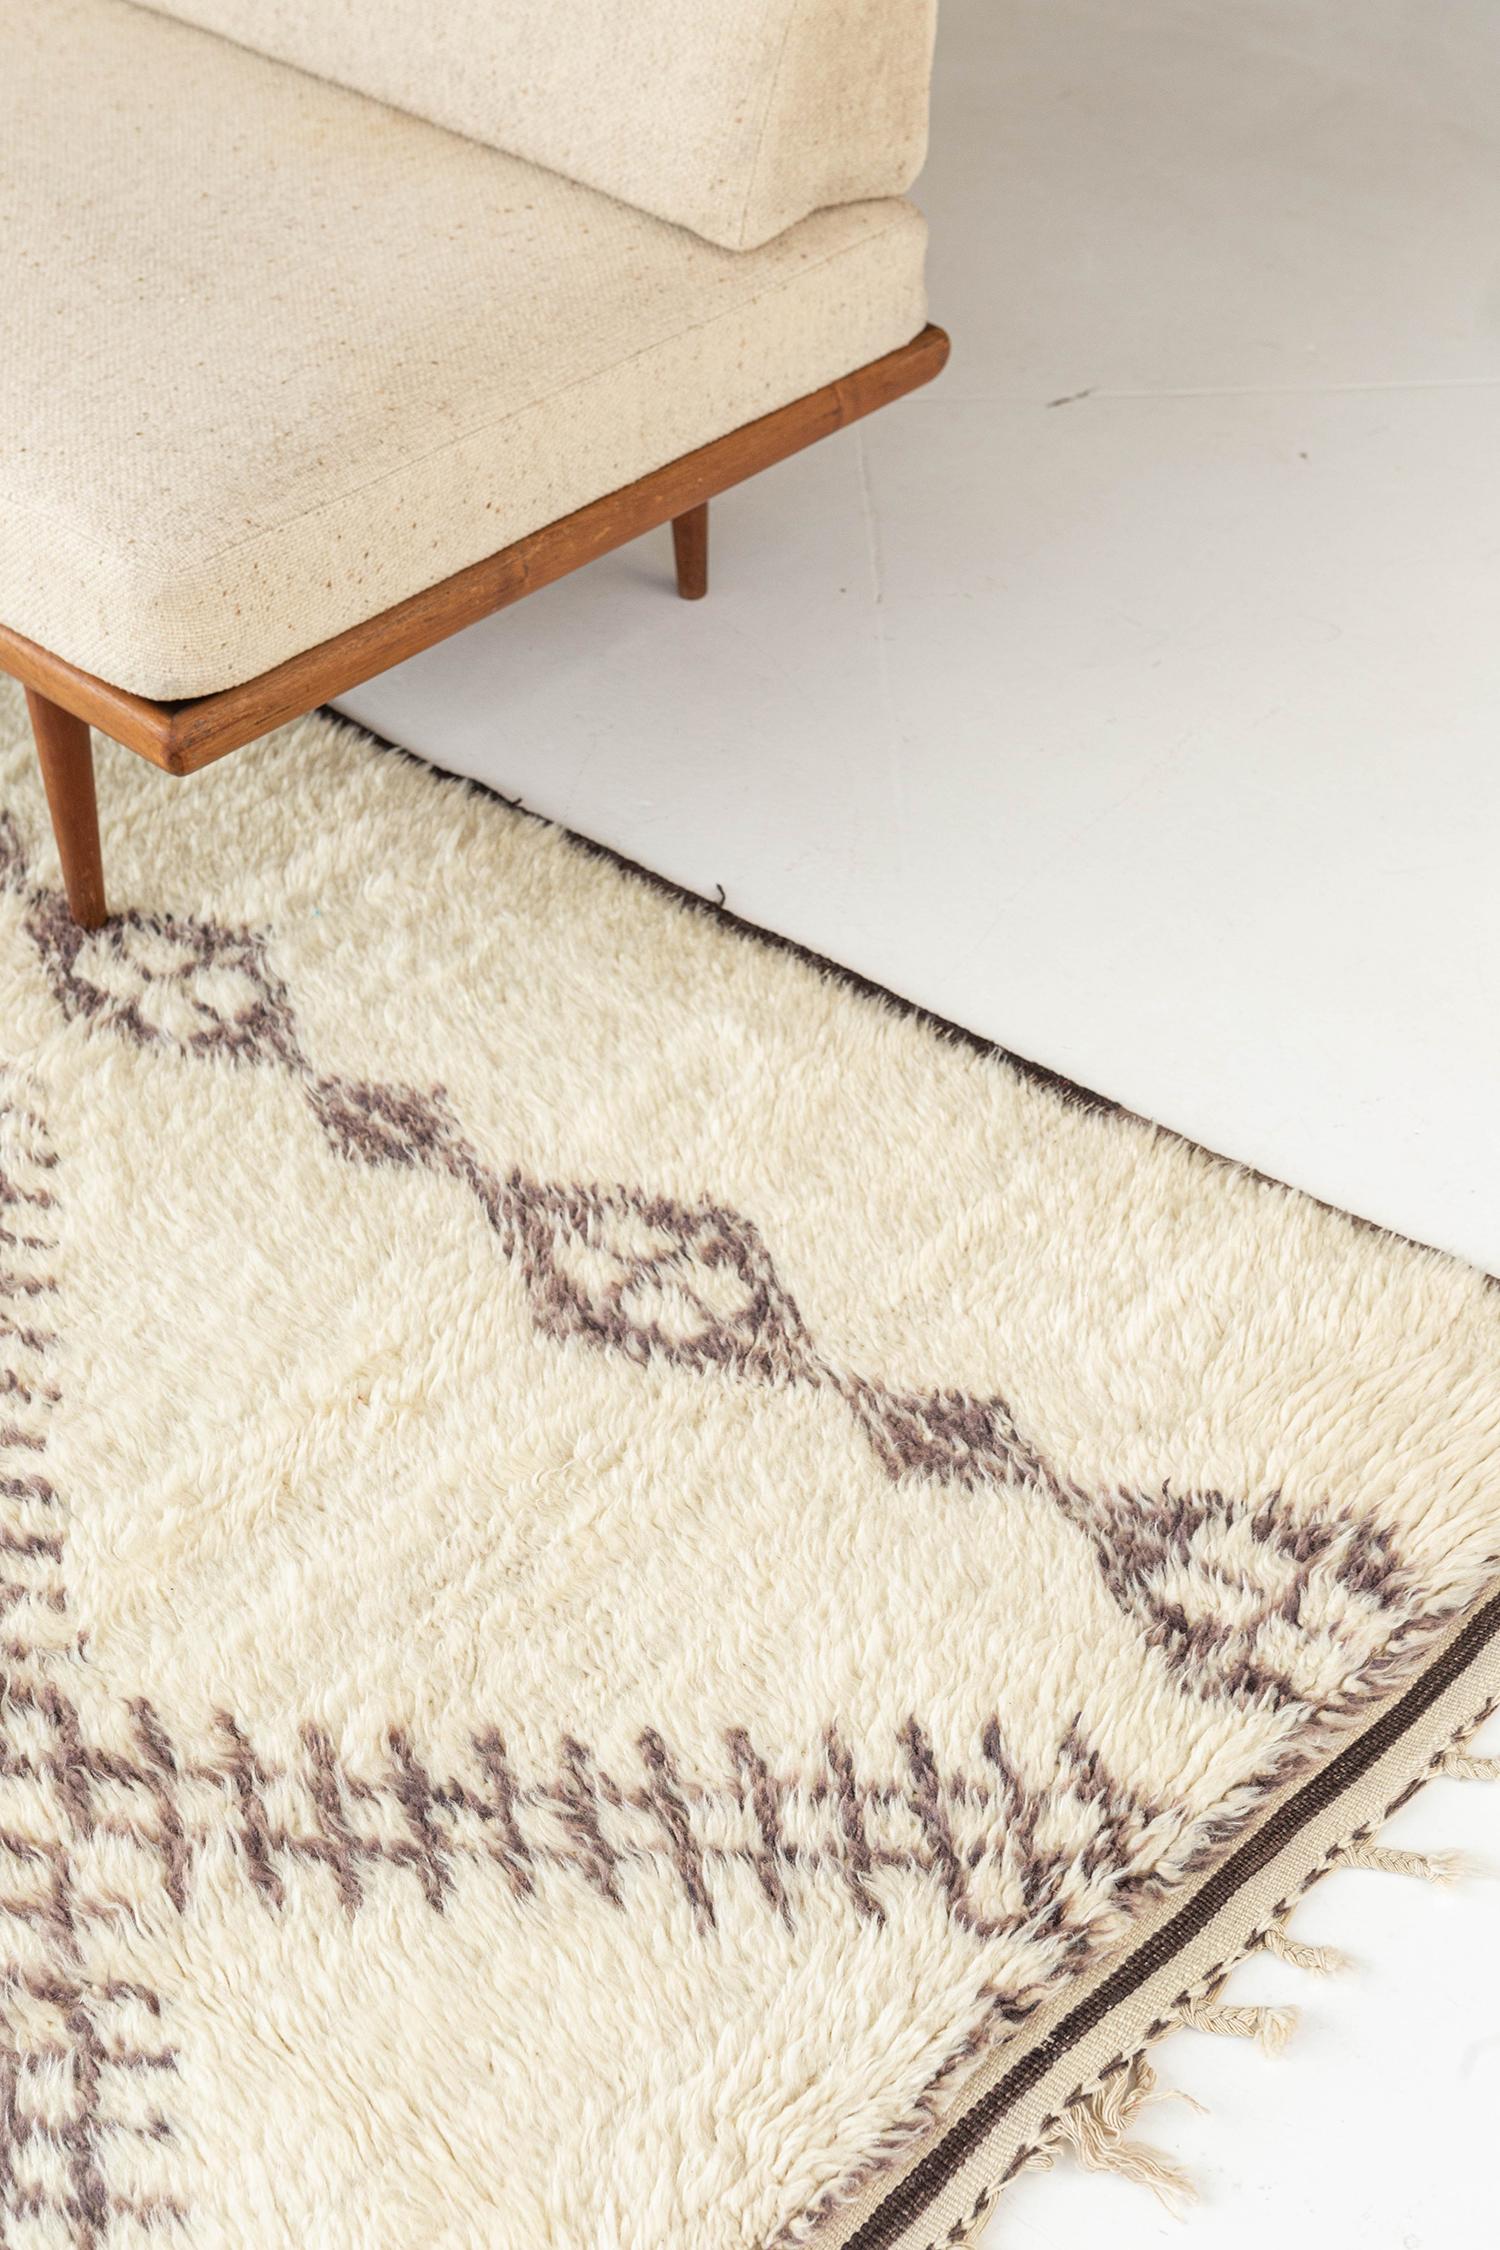 Snug with this home-styled Moroccan rug from our Atlas Collection. Cozy, warm, and comfy, together with dark and light colors. Playful lozenges with extended sides and fringes are matched to your contemporary home interior.

Rug number 12785
Size